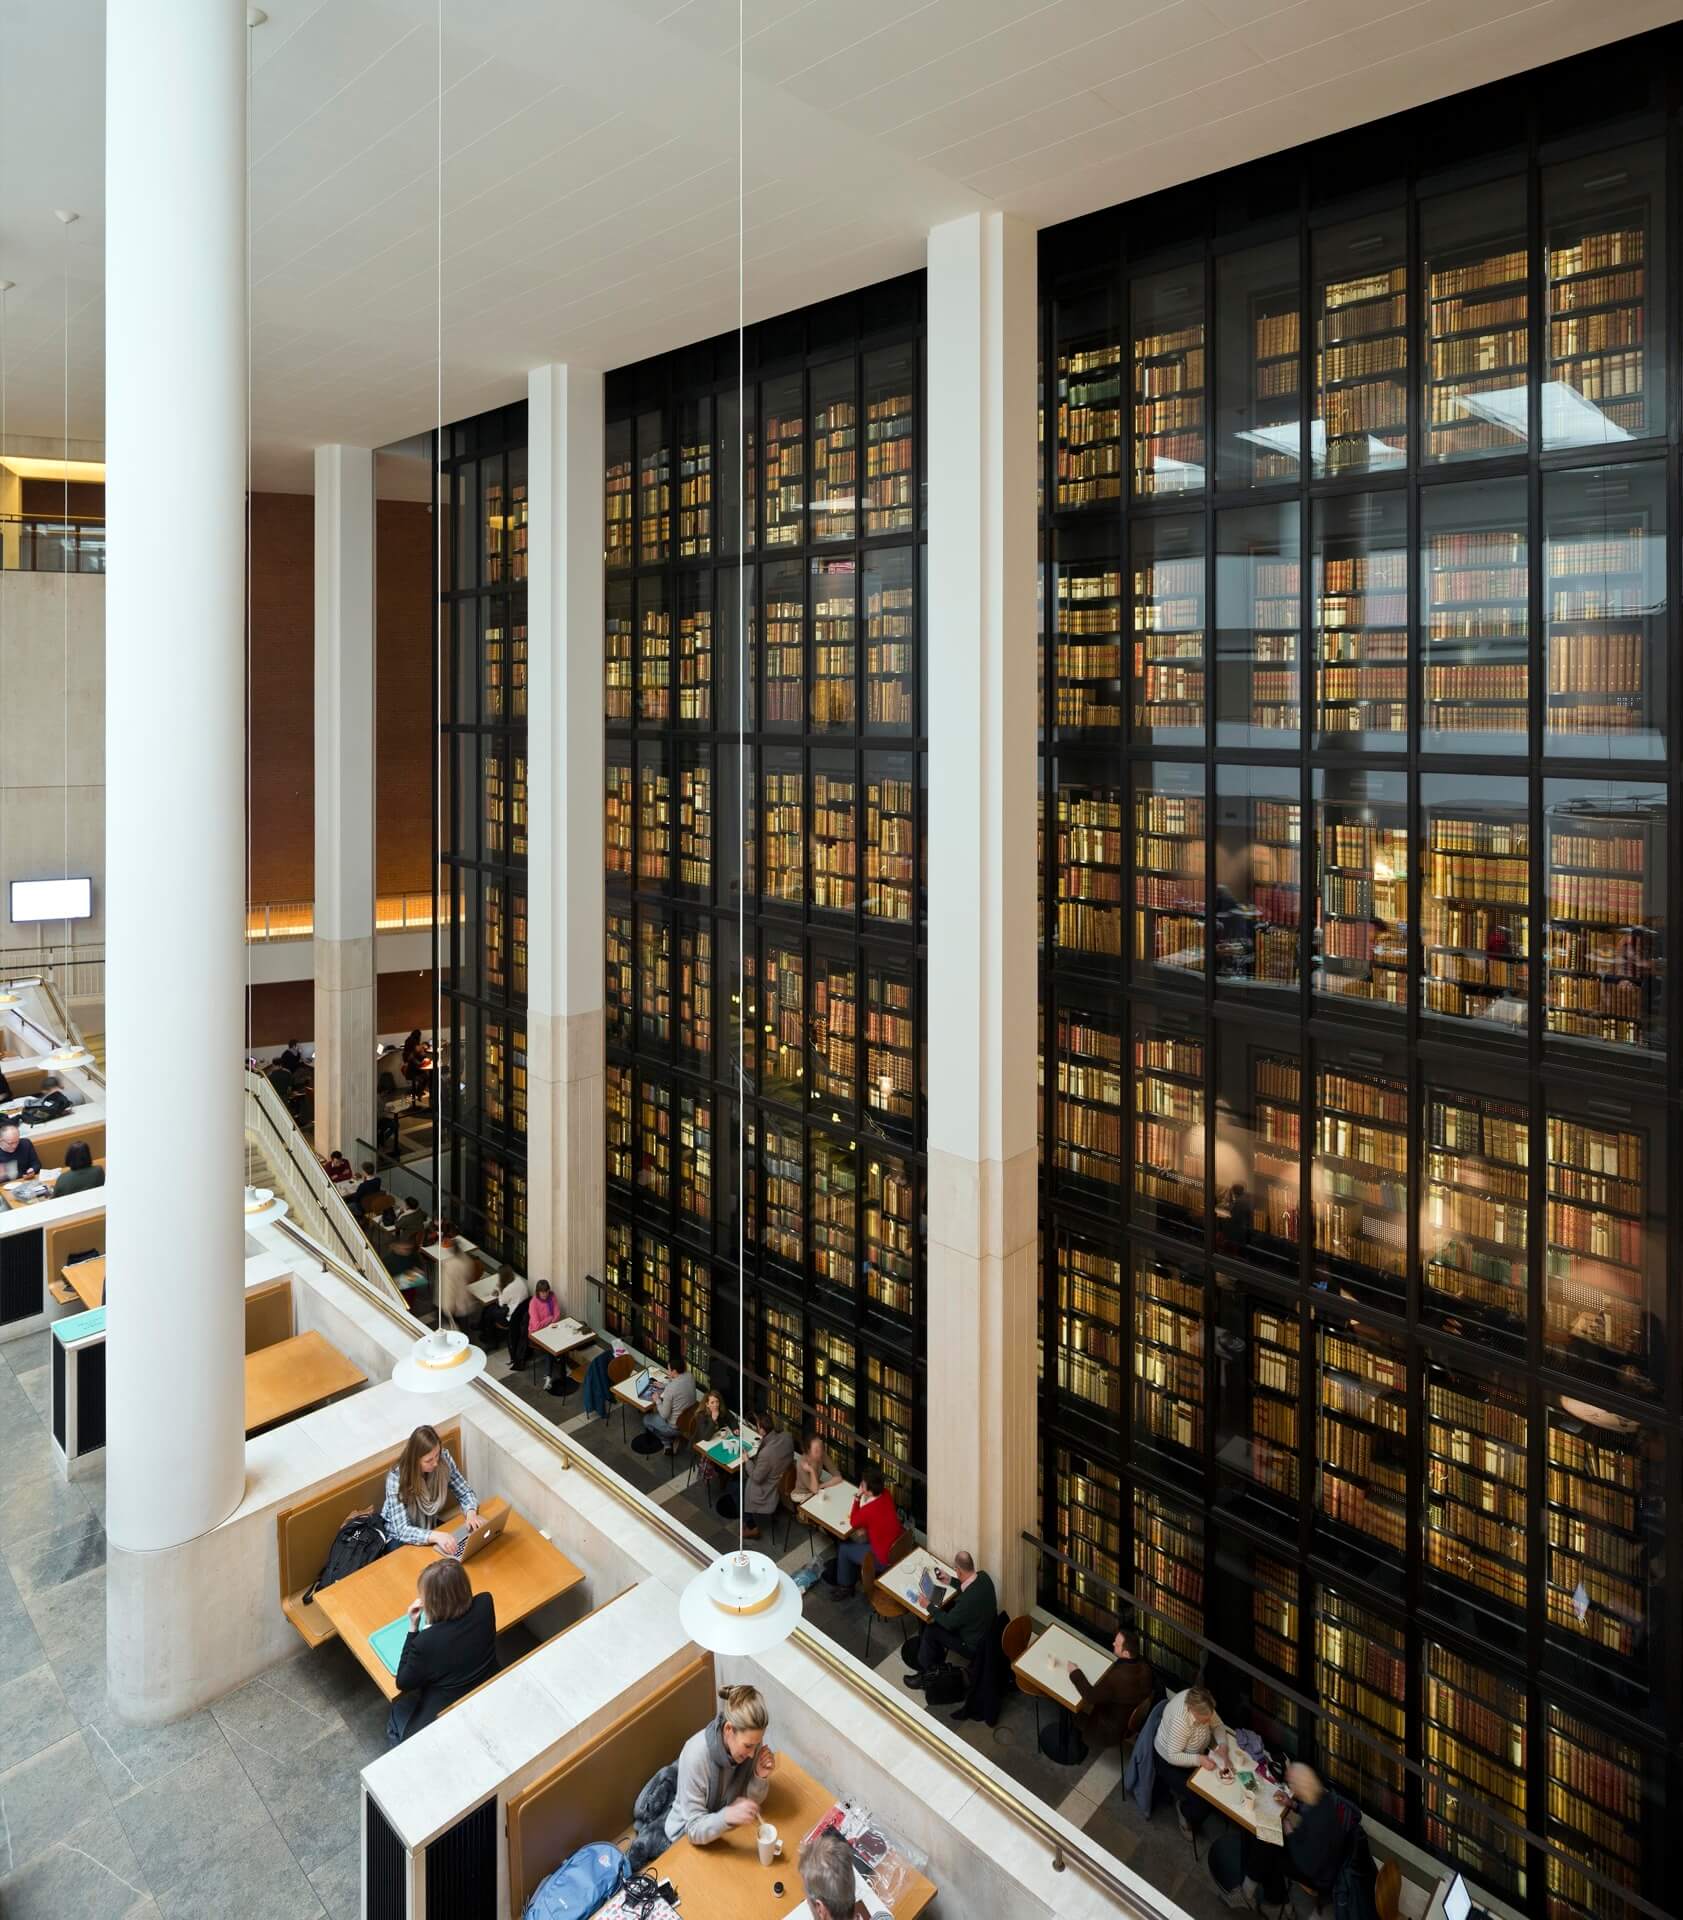 The British Library, London - a free place for co-working